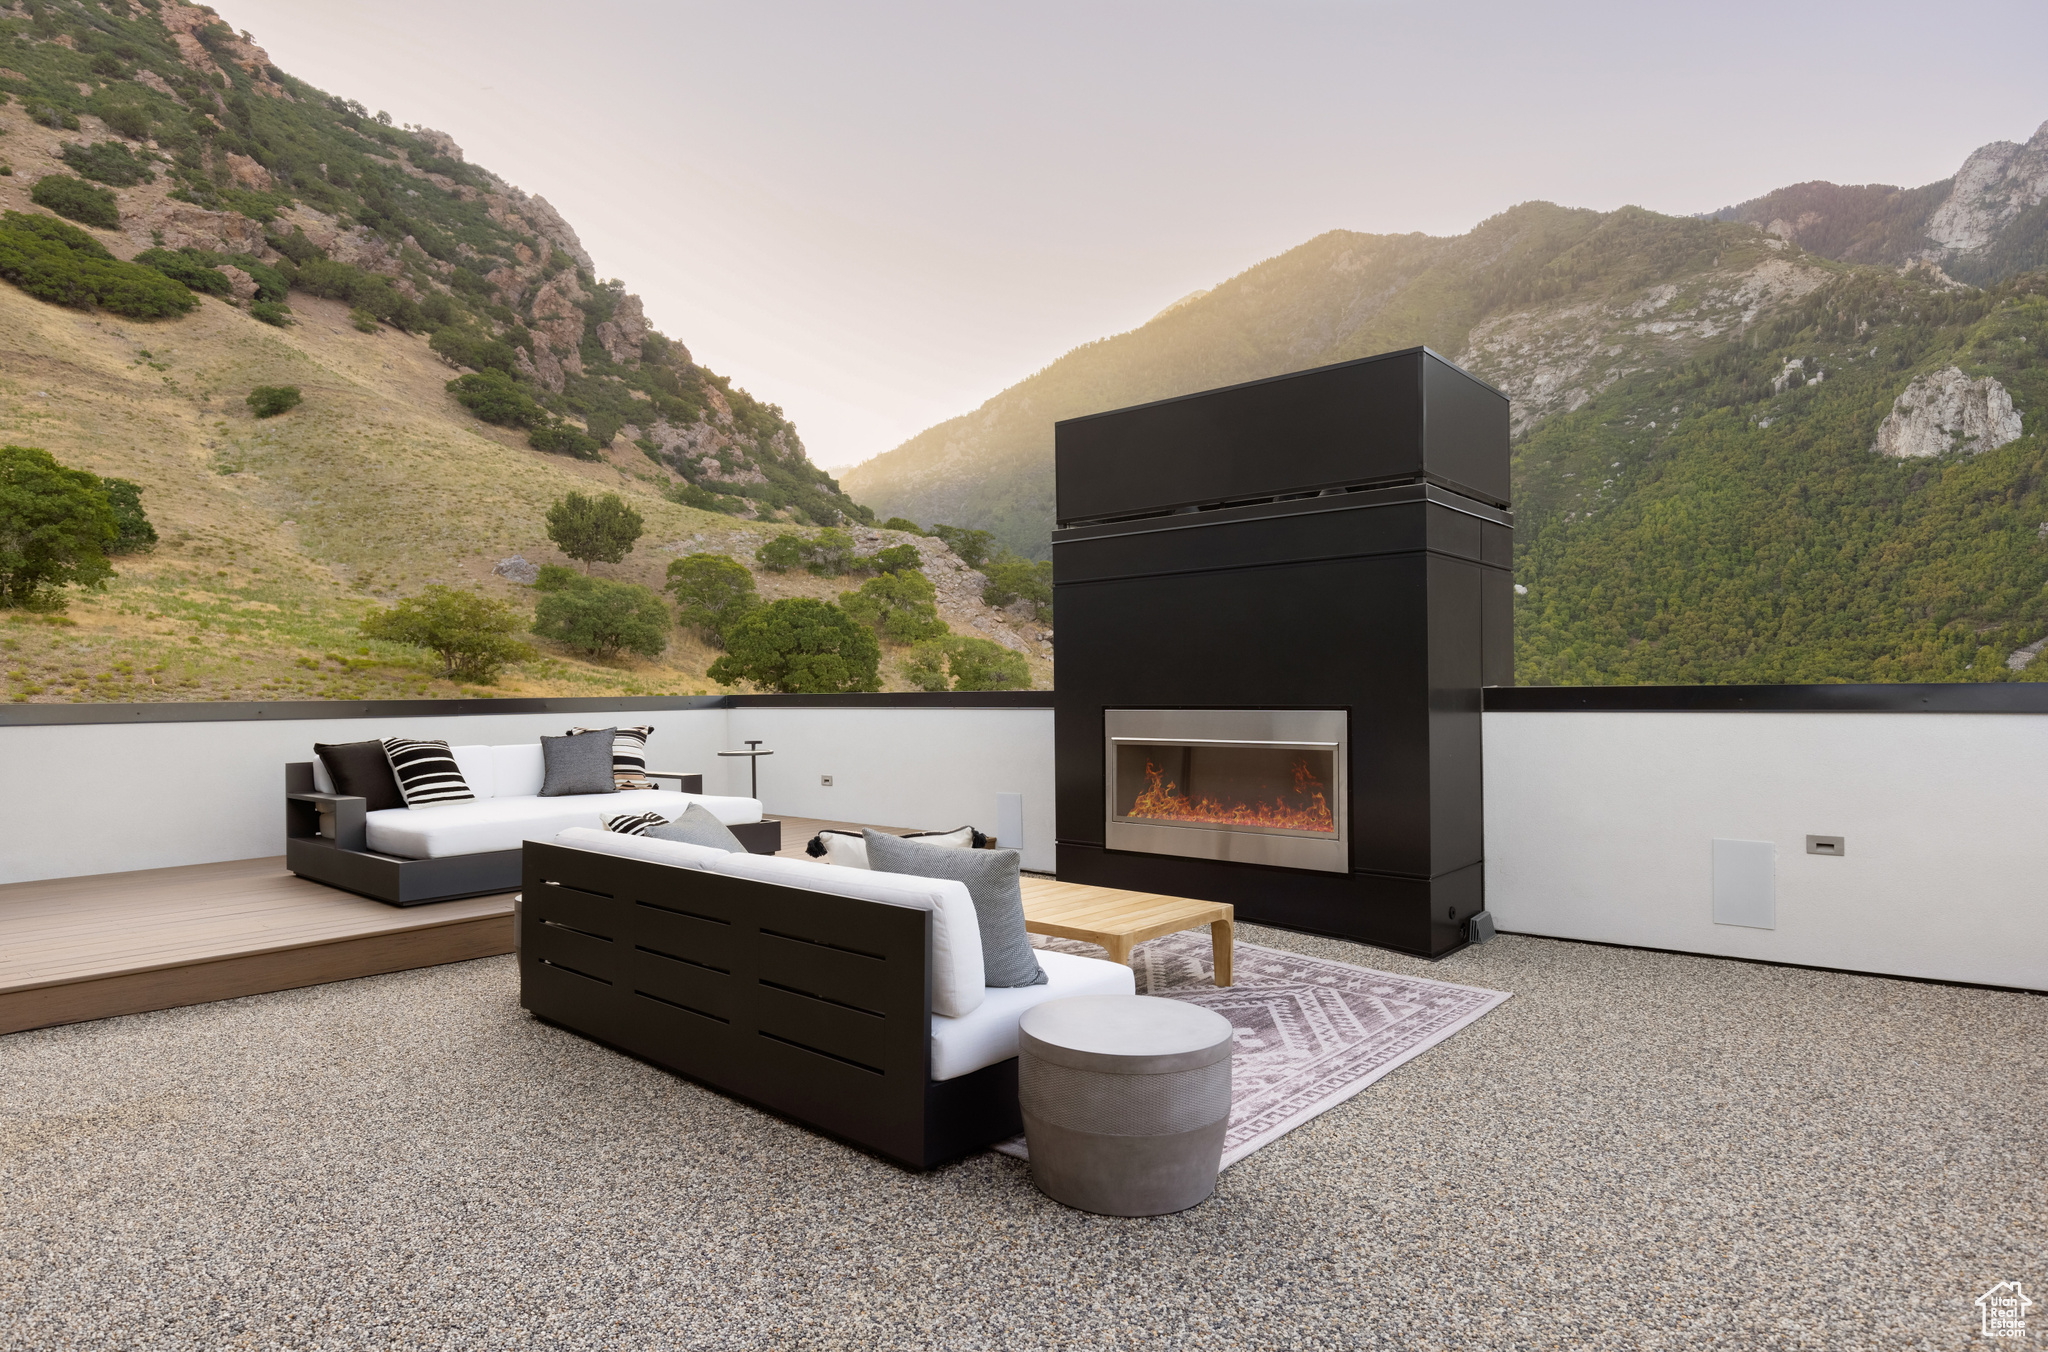 Primary Bed/Bath Suite's Private Oversized Outdoor Living Space